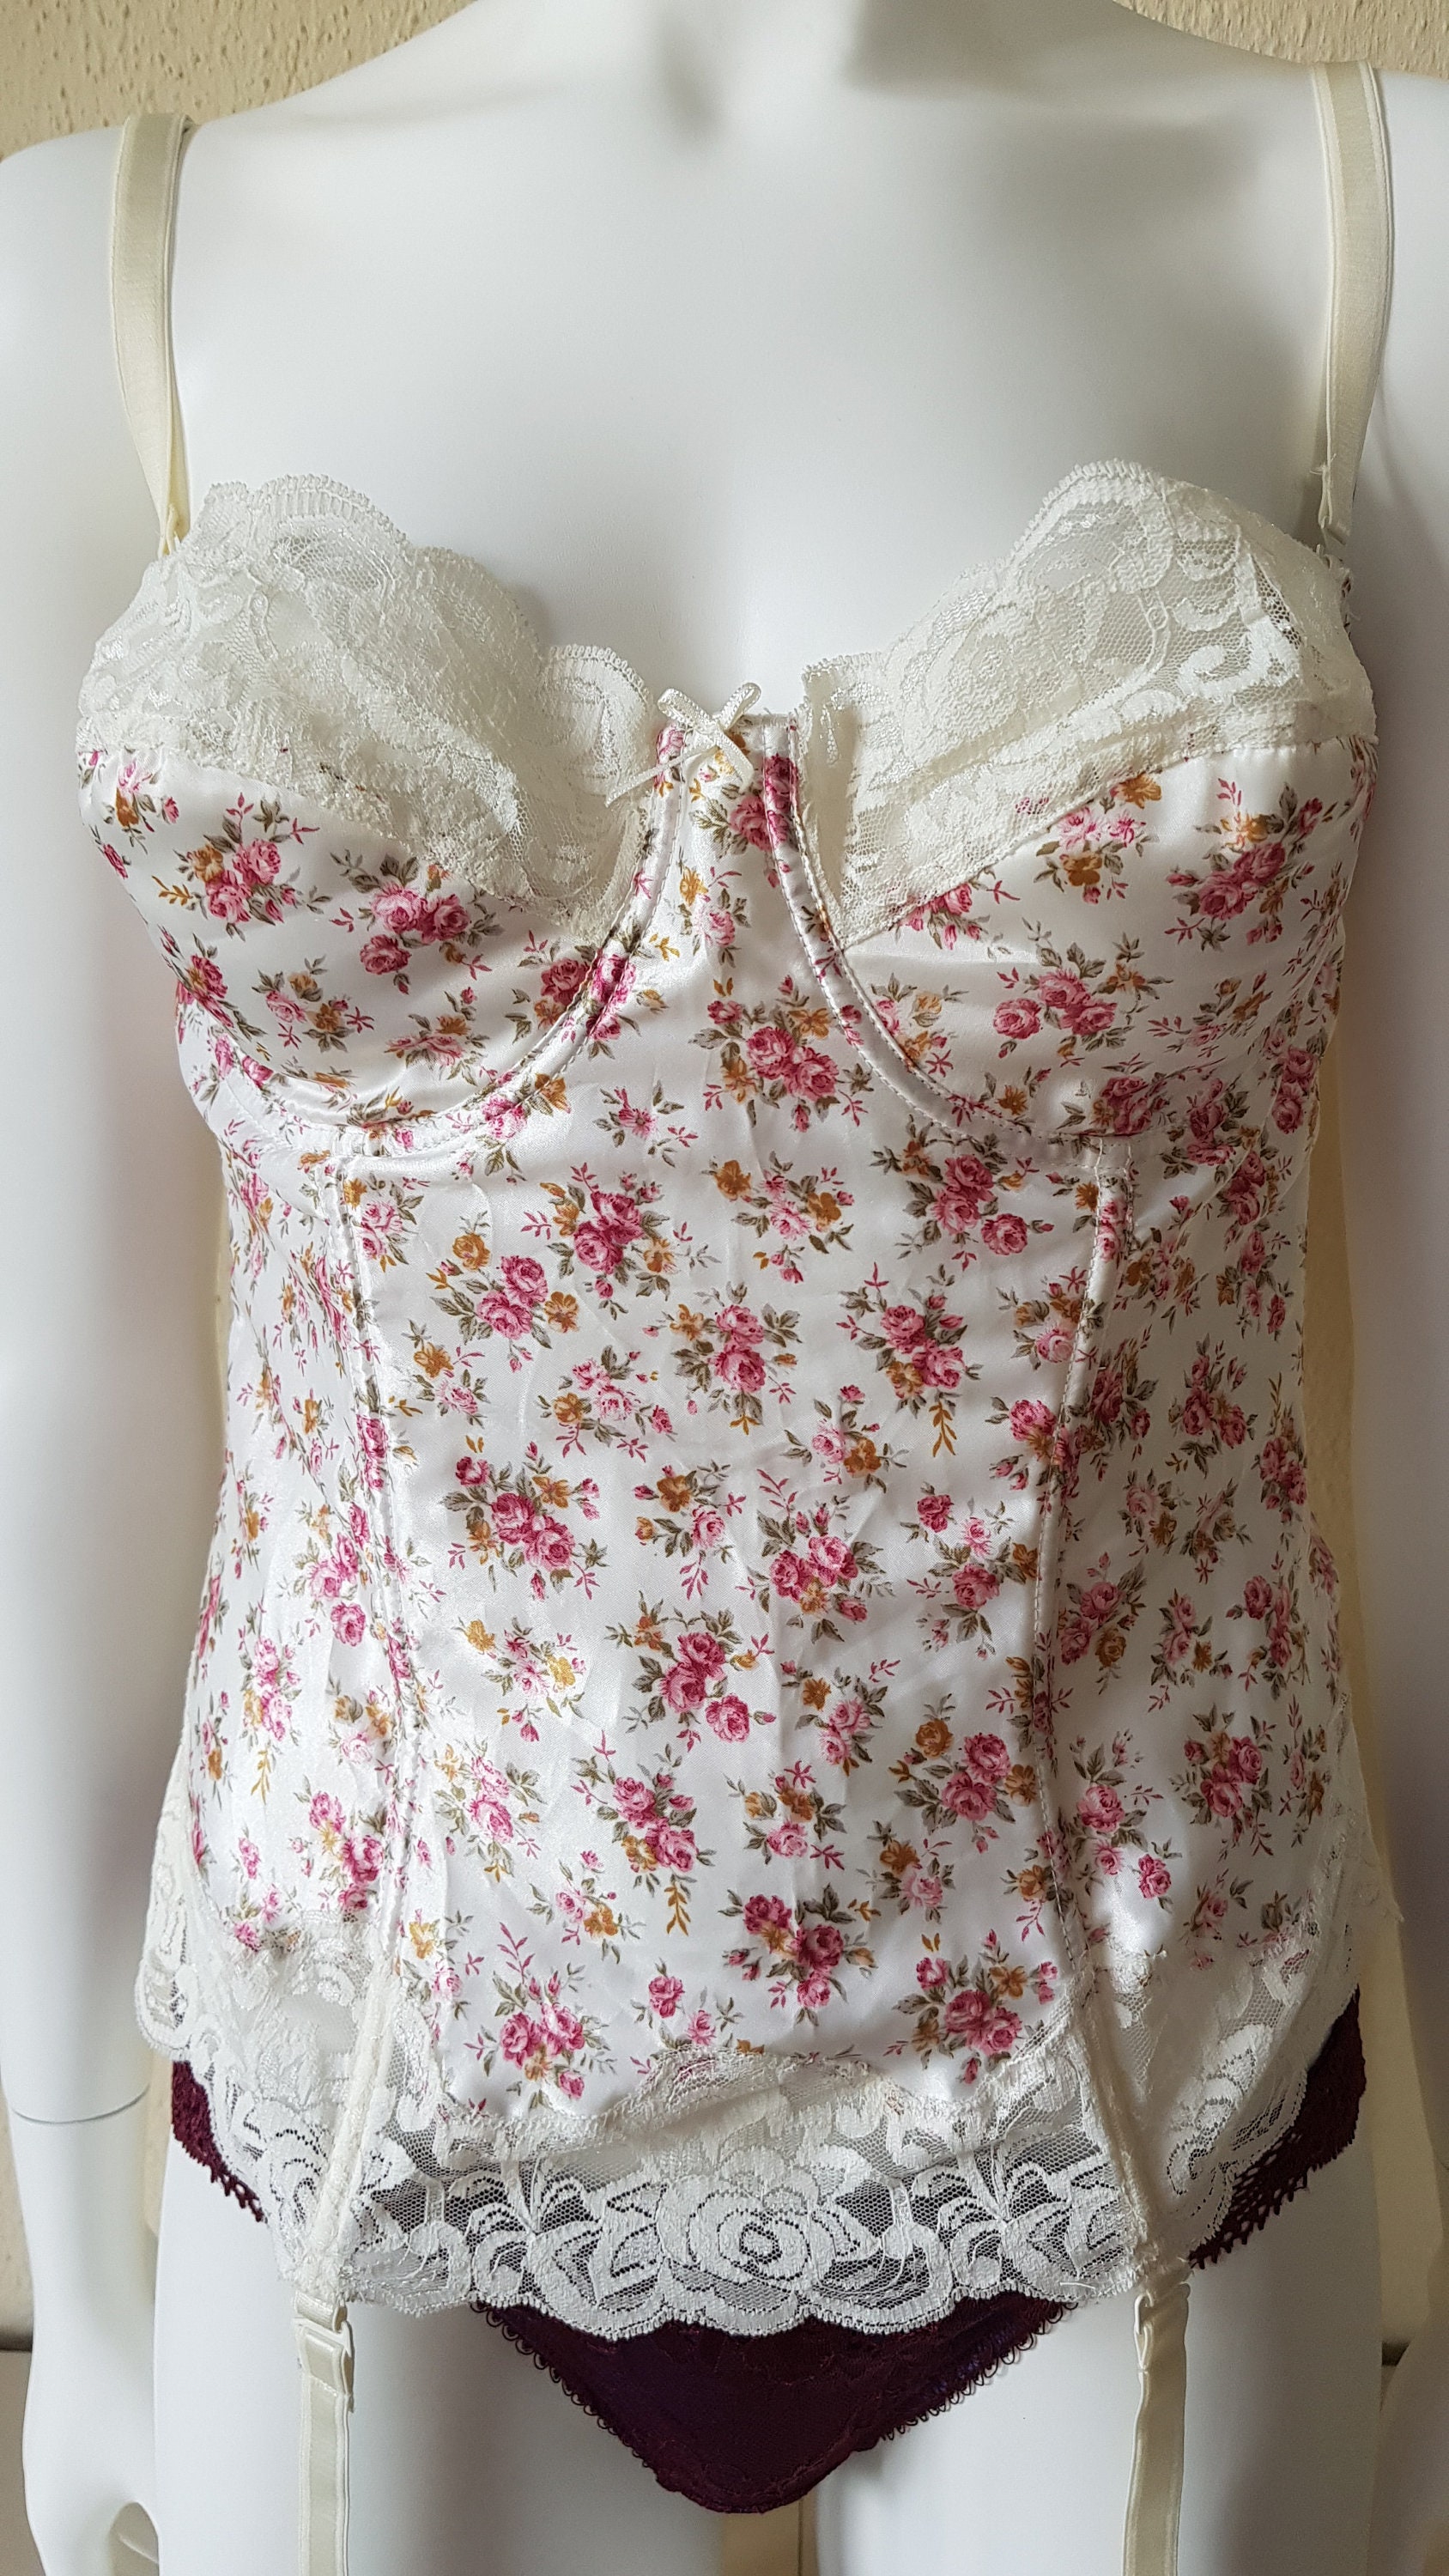 90's Corset by H&M Hennes and Mauritz, Vintage Boned Corset Top, 38B 85B 